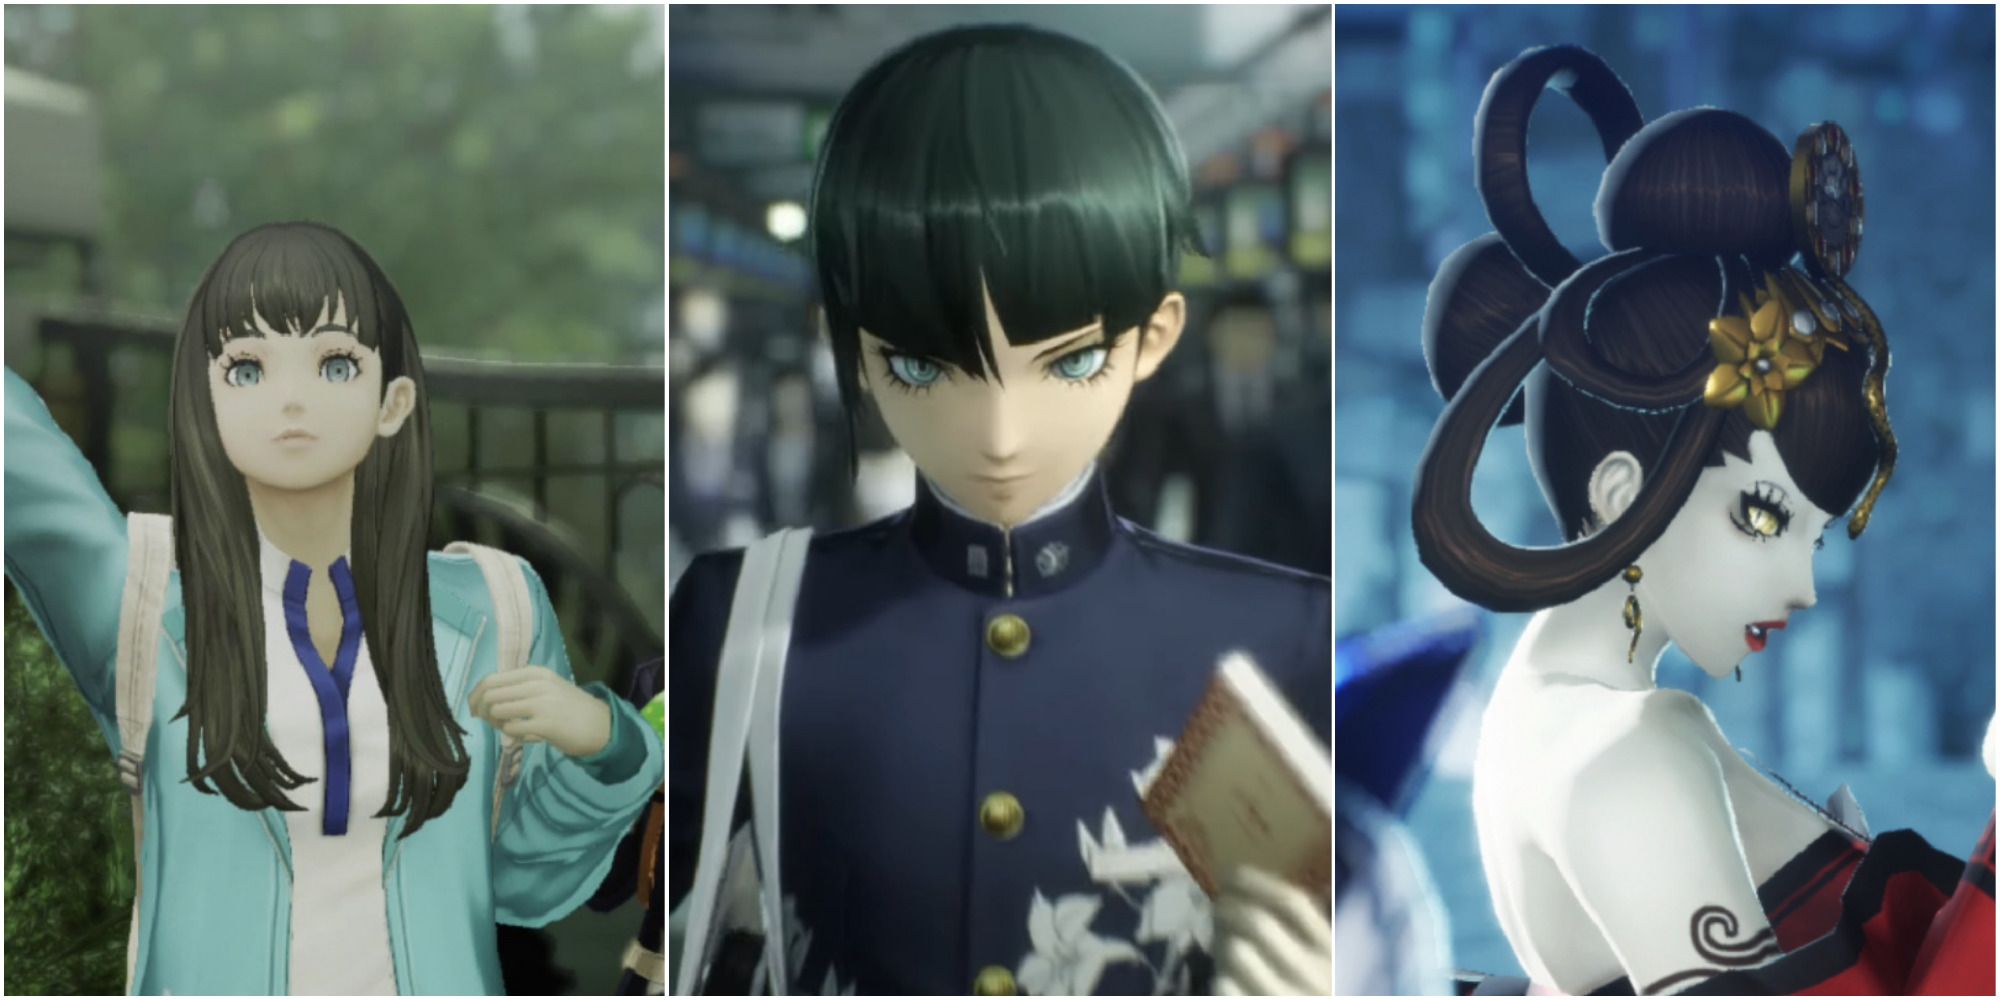 A collage of images from Shin Megami Tensei 5, featuring Tao Isonokami; the main character before he turns into a Nahobino; and a demon